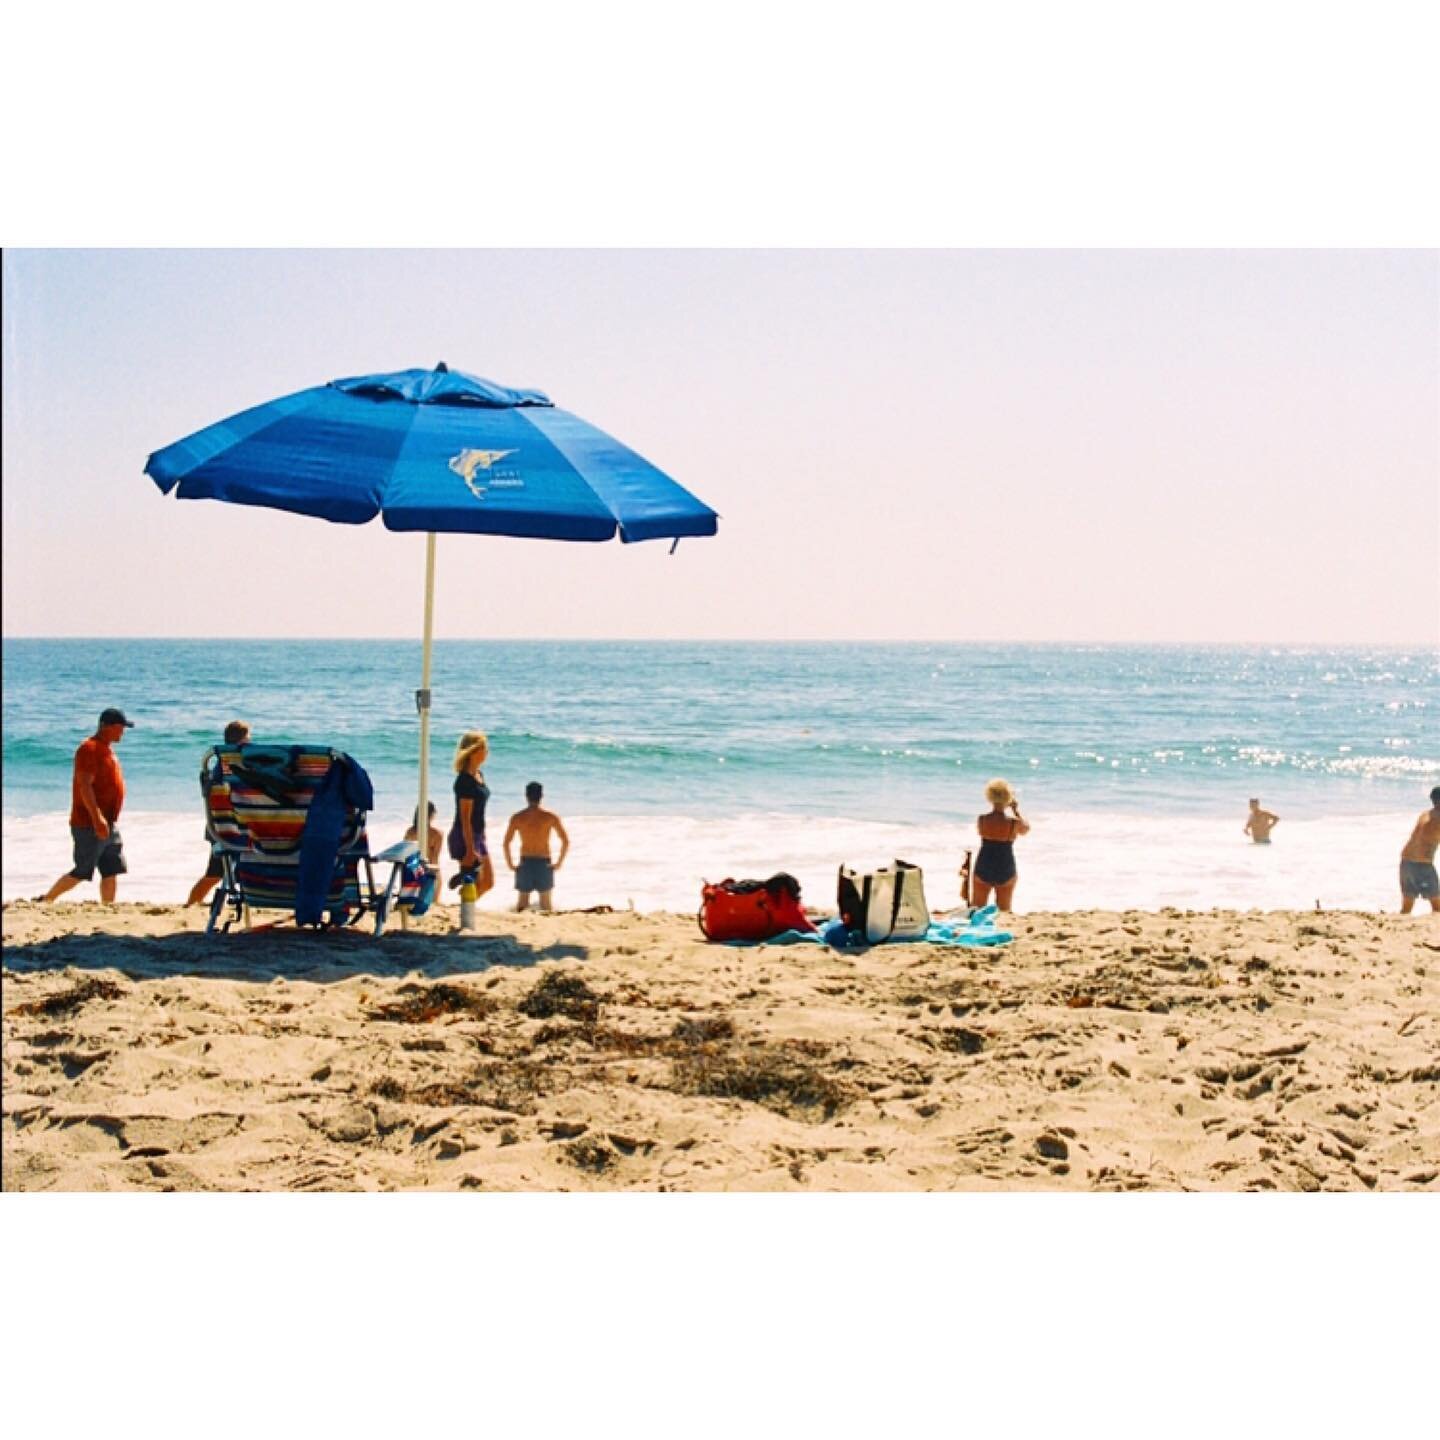 Pooped on, Stung and Burnt, but all round a lovely day 😂
#losangeles #malibu #sun #umbrella #beach #holidays #film #olympus #om10 #portra400 #35mm